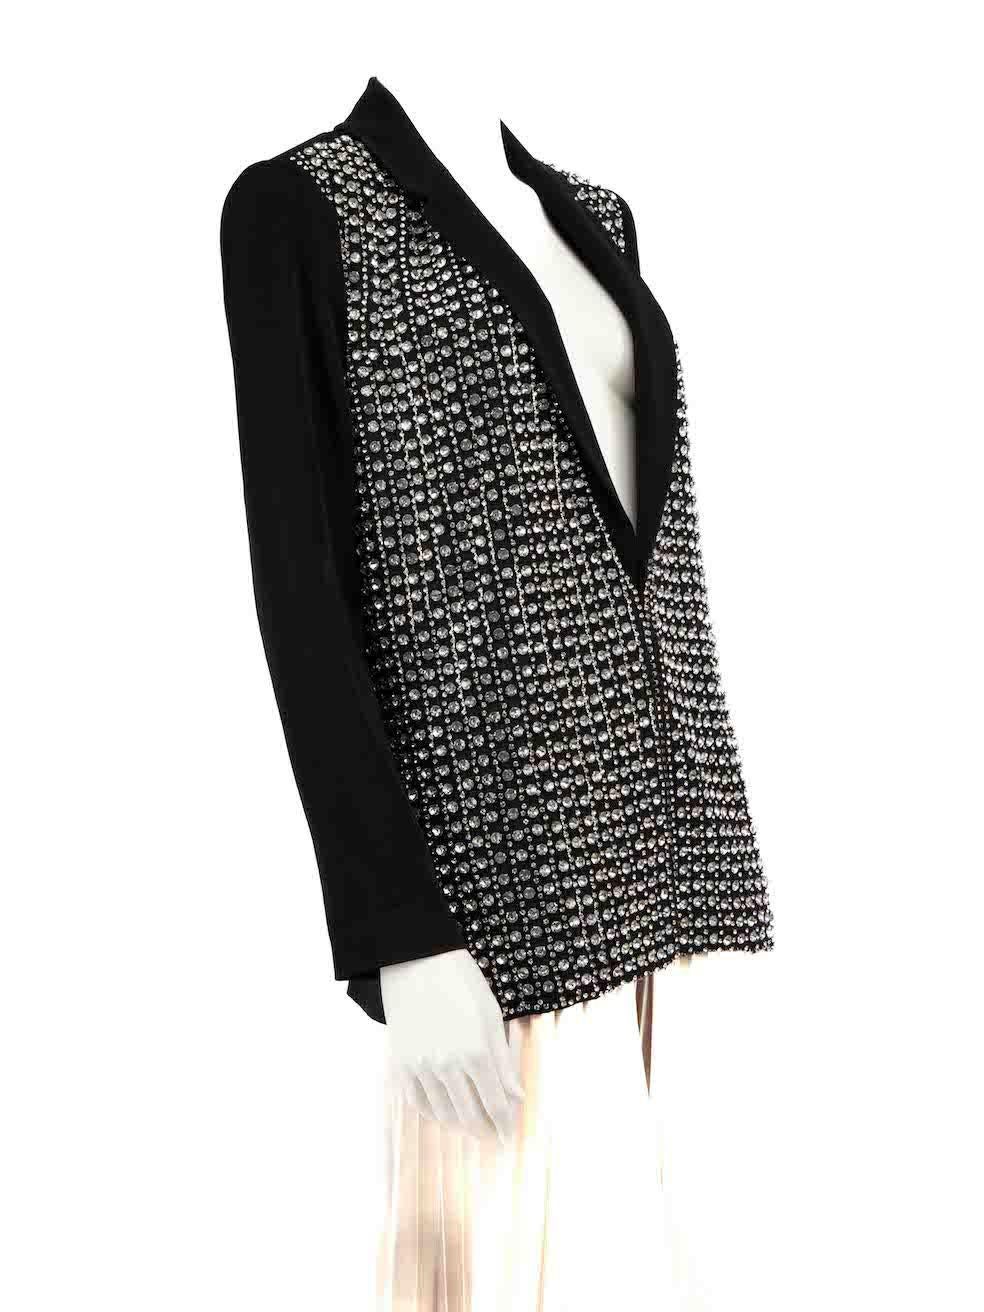 CONDITION is Very good. Minimal wear to jacket is evident. Minimal plucks to overall material especially on the sleeves and rear shoulder on this used Alice + Olivia designer resale item.
 
 
 
 Details
 
 
 Black
 
 Synthetic
 
 Blazer
 
 Crystal